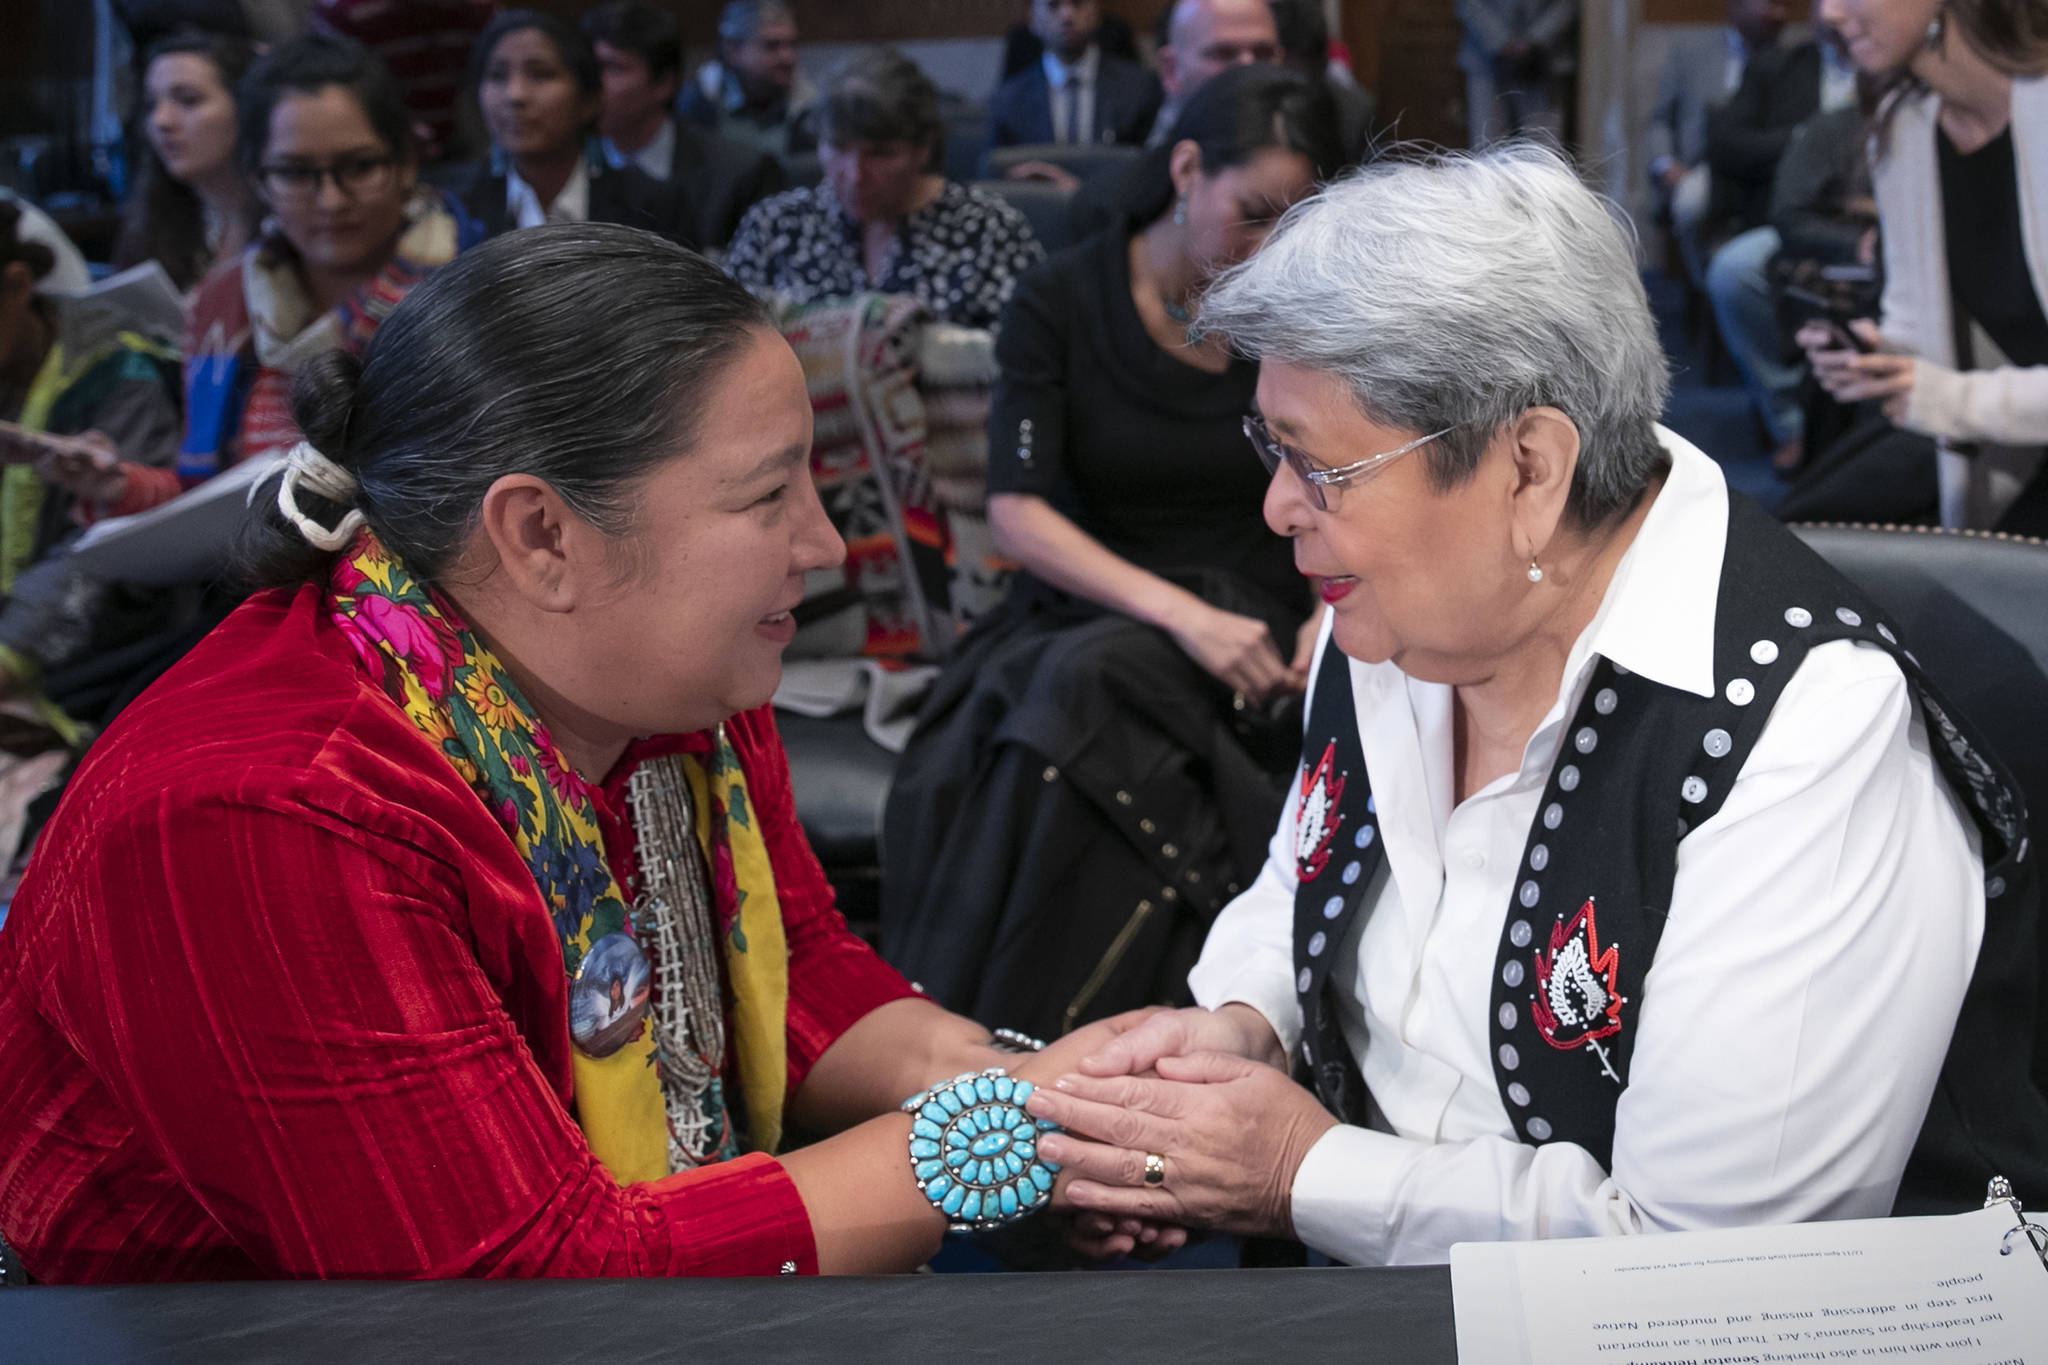 Amber Crotty from Window Rock, Ariz., left, a delegate of the Navajo Nation Council, and Patricia Alexander of the Tlingit and Haida Indian Tribes of Alaska, right, exchange words of encouragement to each other before testifying as the Senate Committee on Indian Affairs holds a hearing to examine concerns about investigations into the deaths and disappearance of Native American women, on Capitol Hill in Washington, Wednesday, Dec. 12, 2018. (AP Photo | J. Scott Applewhite)